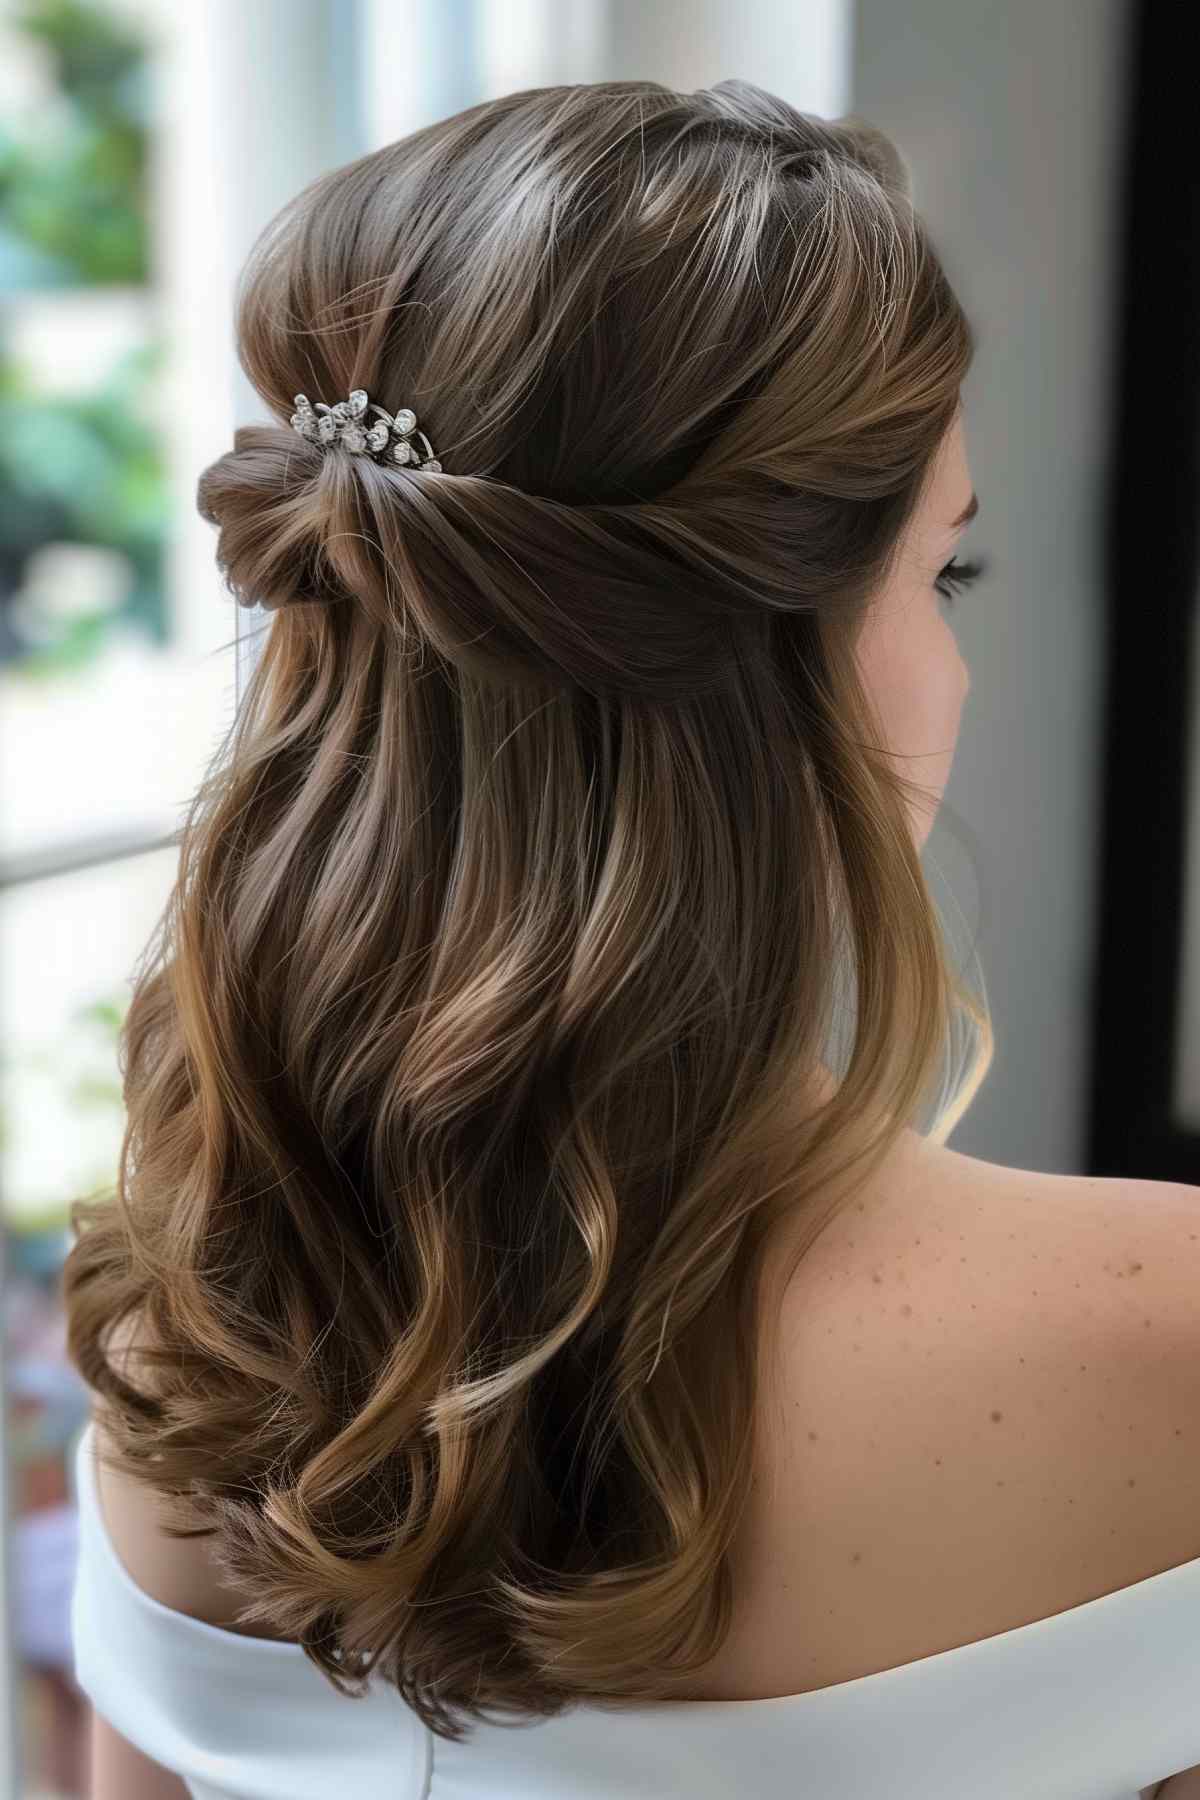 Bridal hairstyle with elegant half-up twist and crystal hair accessory in medium-length brown hair